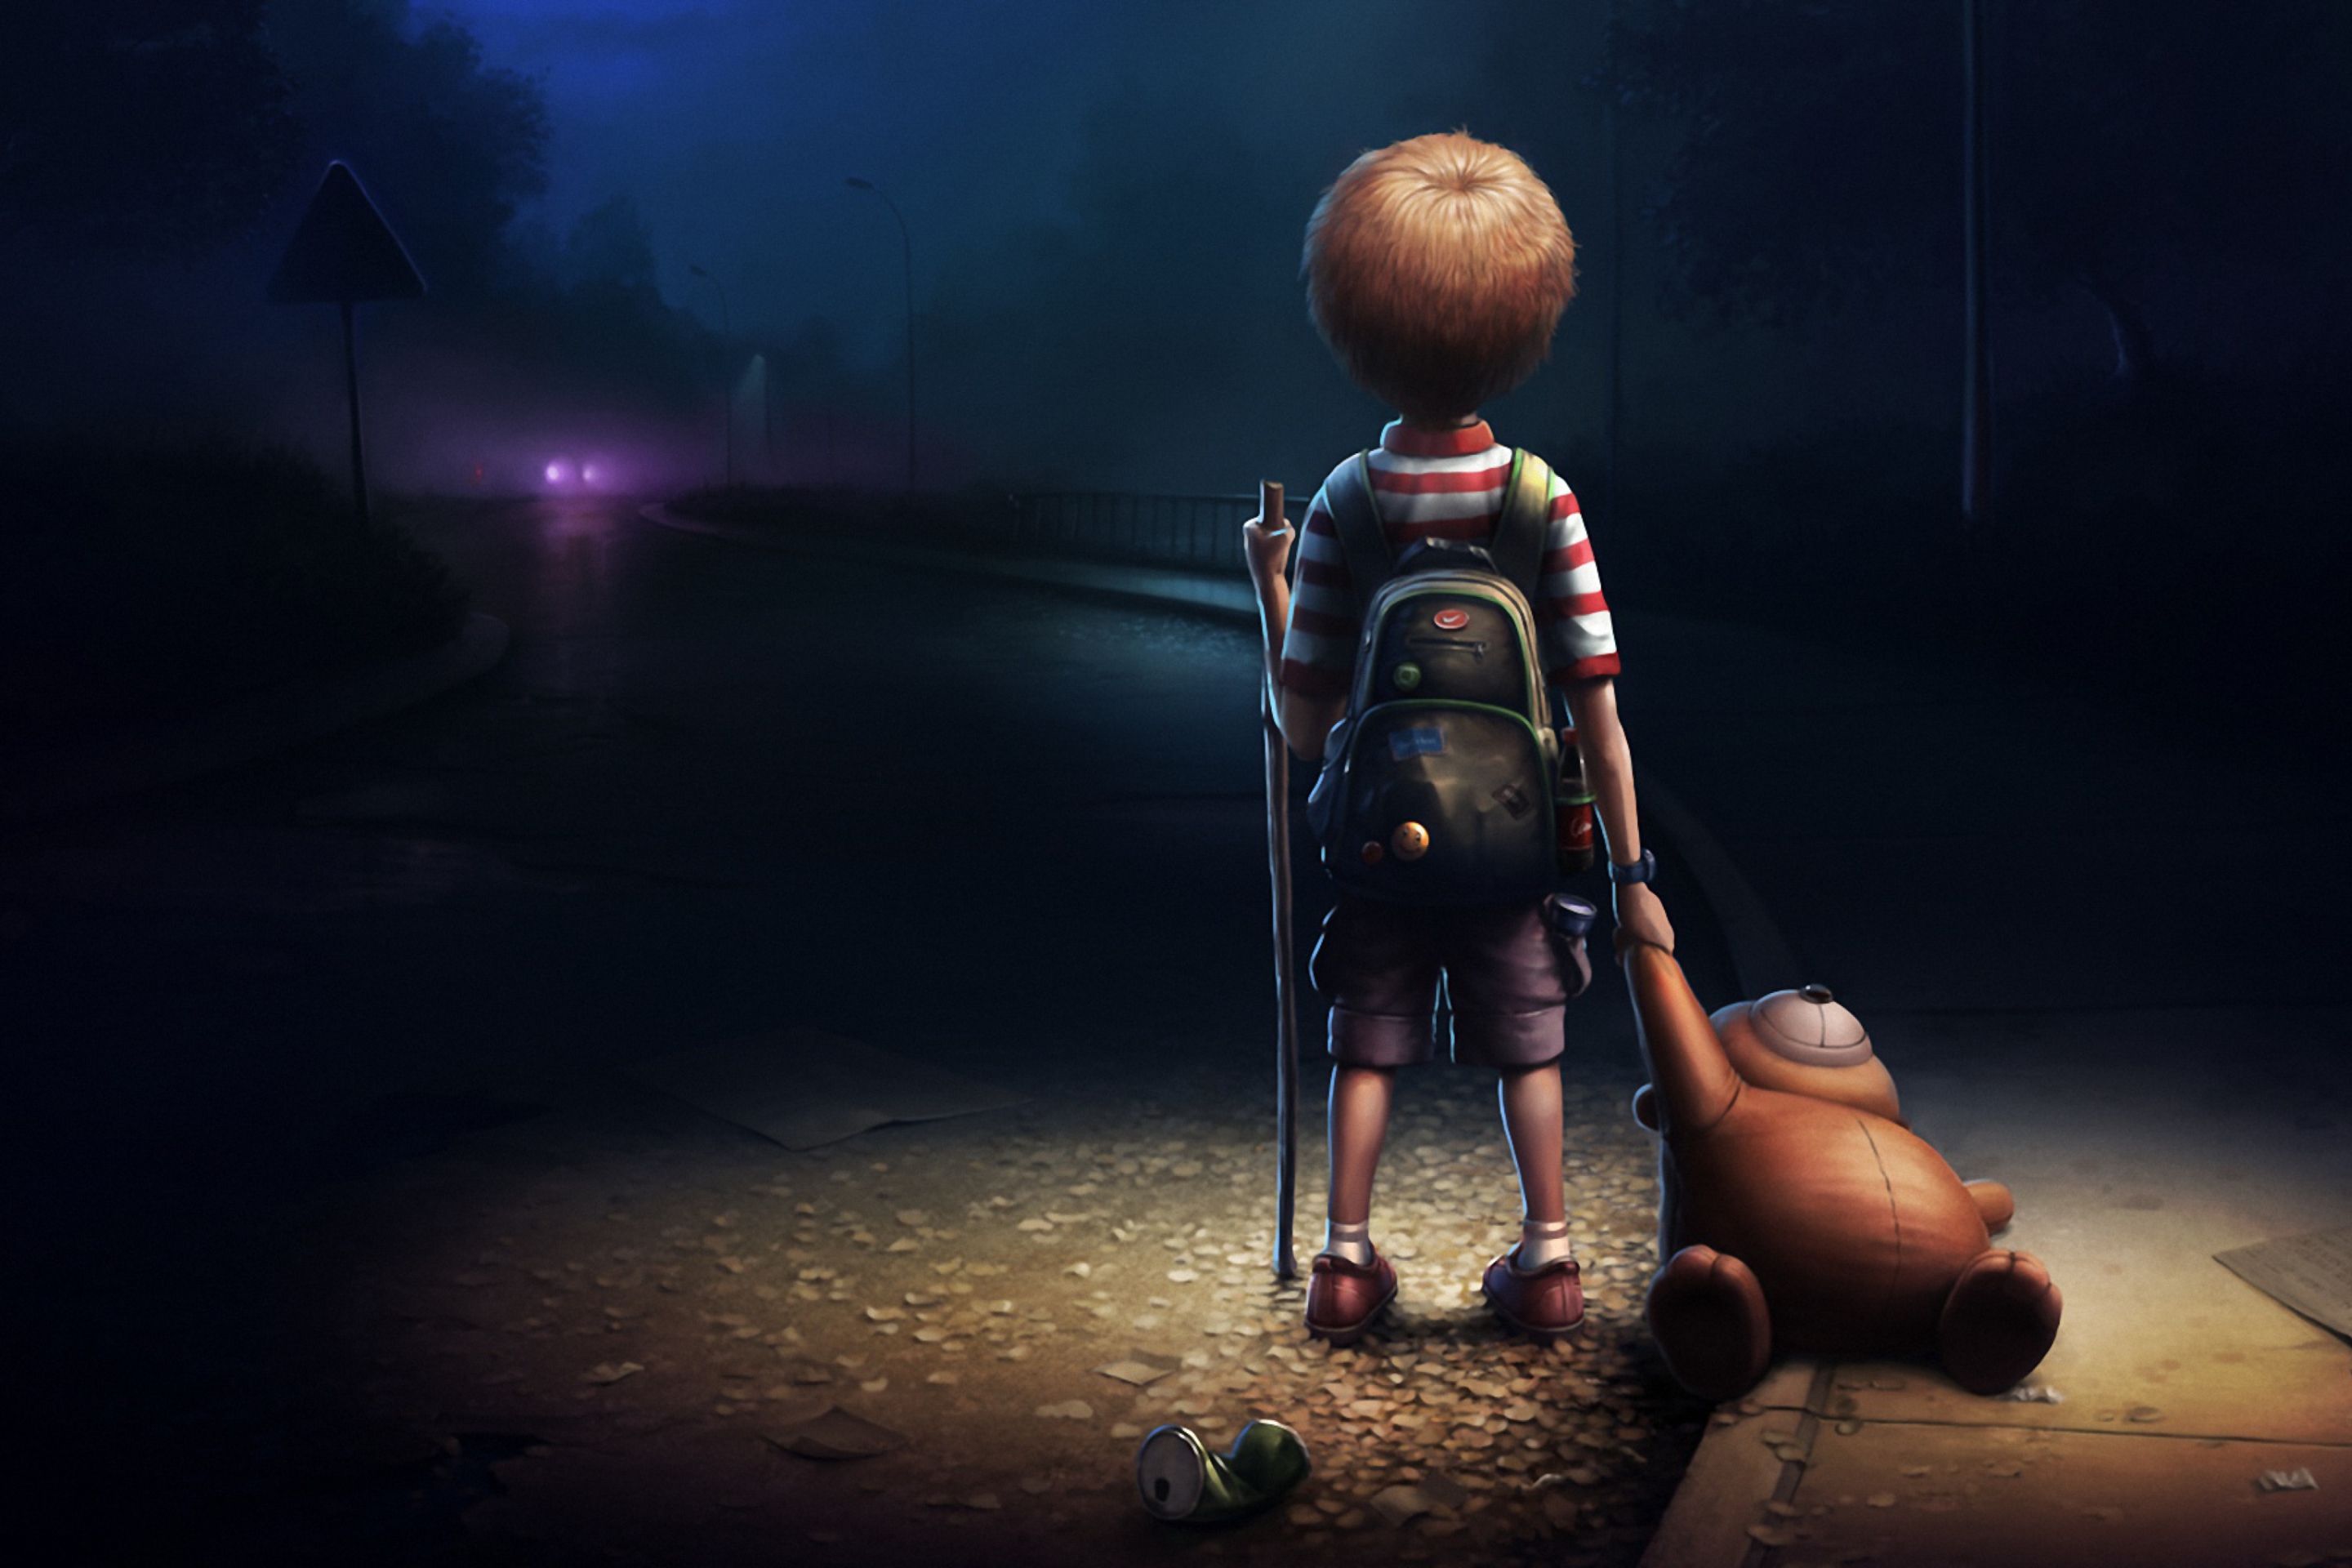 Lonely Child wallpaper 2880x1920